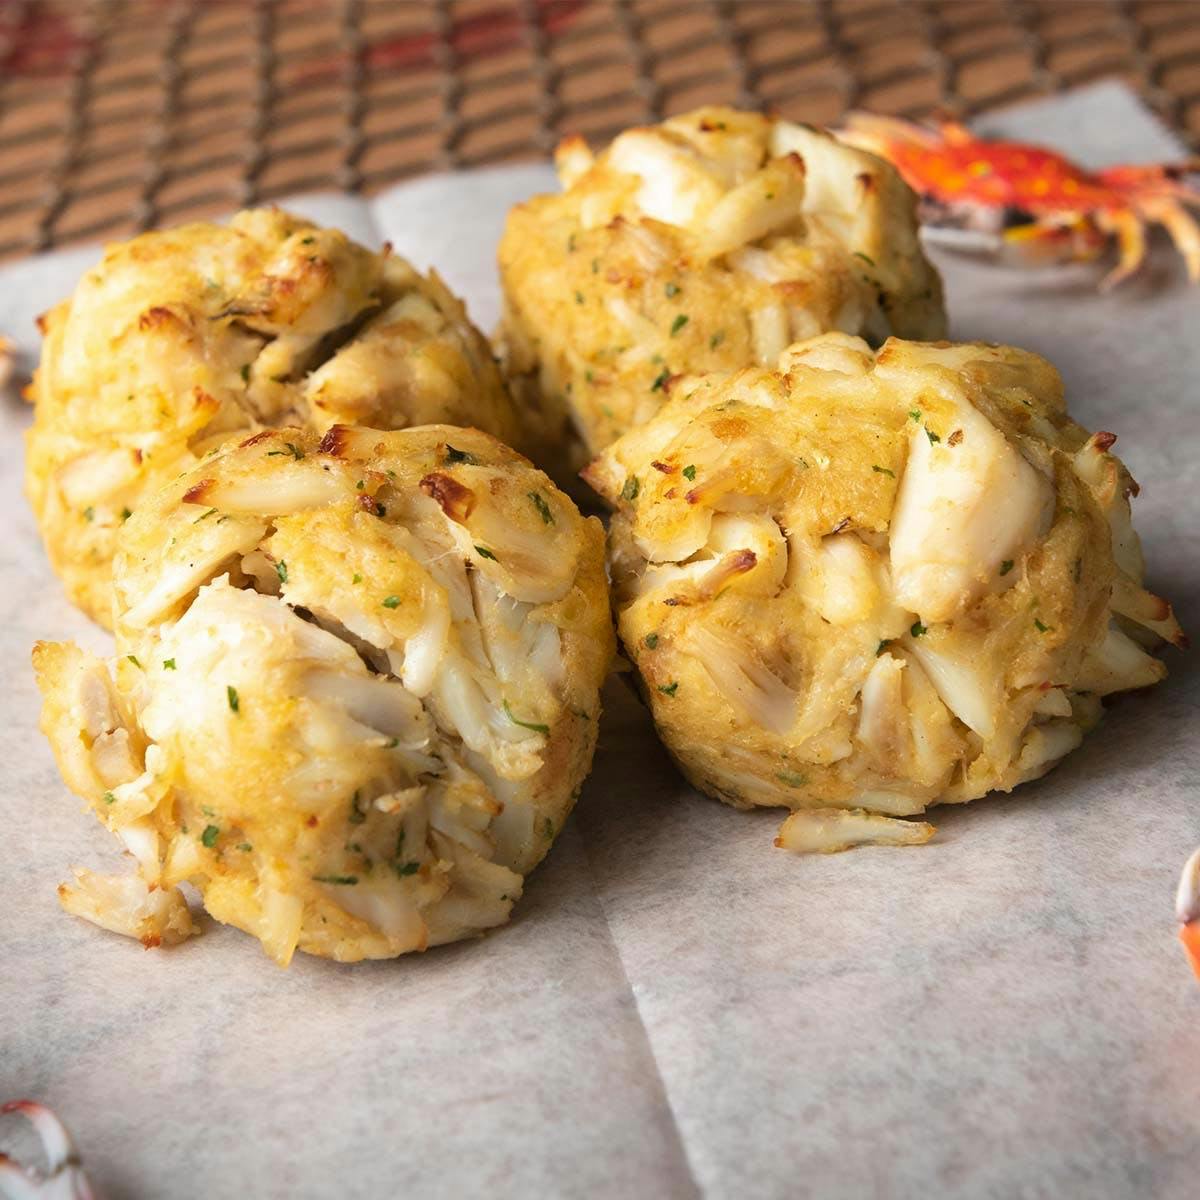 Jumbo Lump Crab Cakes - 4 Pack by Old Ebbitt Grill | Goldbelly